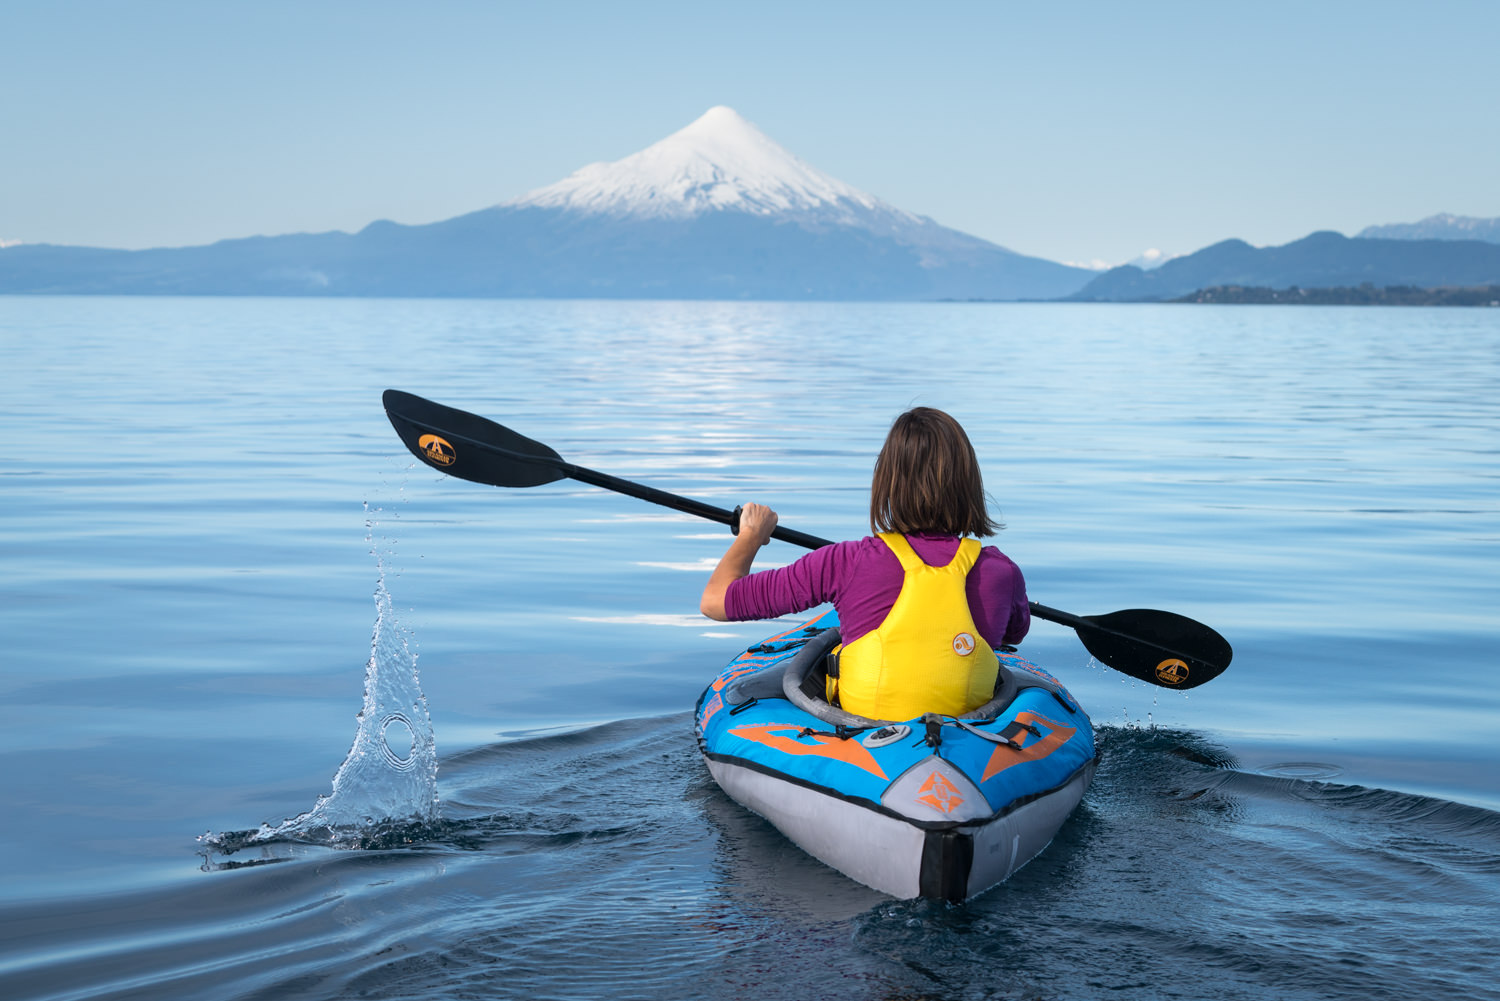 Kayaking Around Puerto Varras, Chile. Taken with Sony a7R II + Sony 70-200 f/4